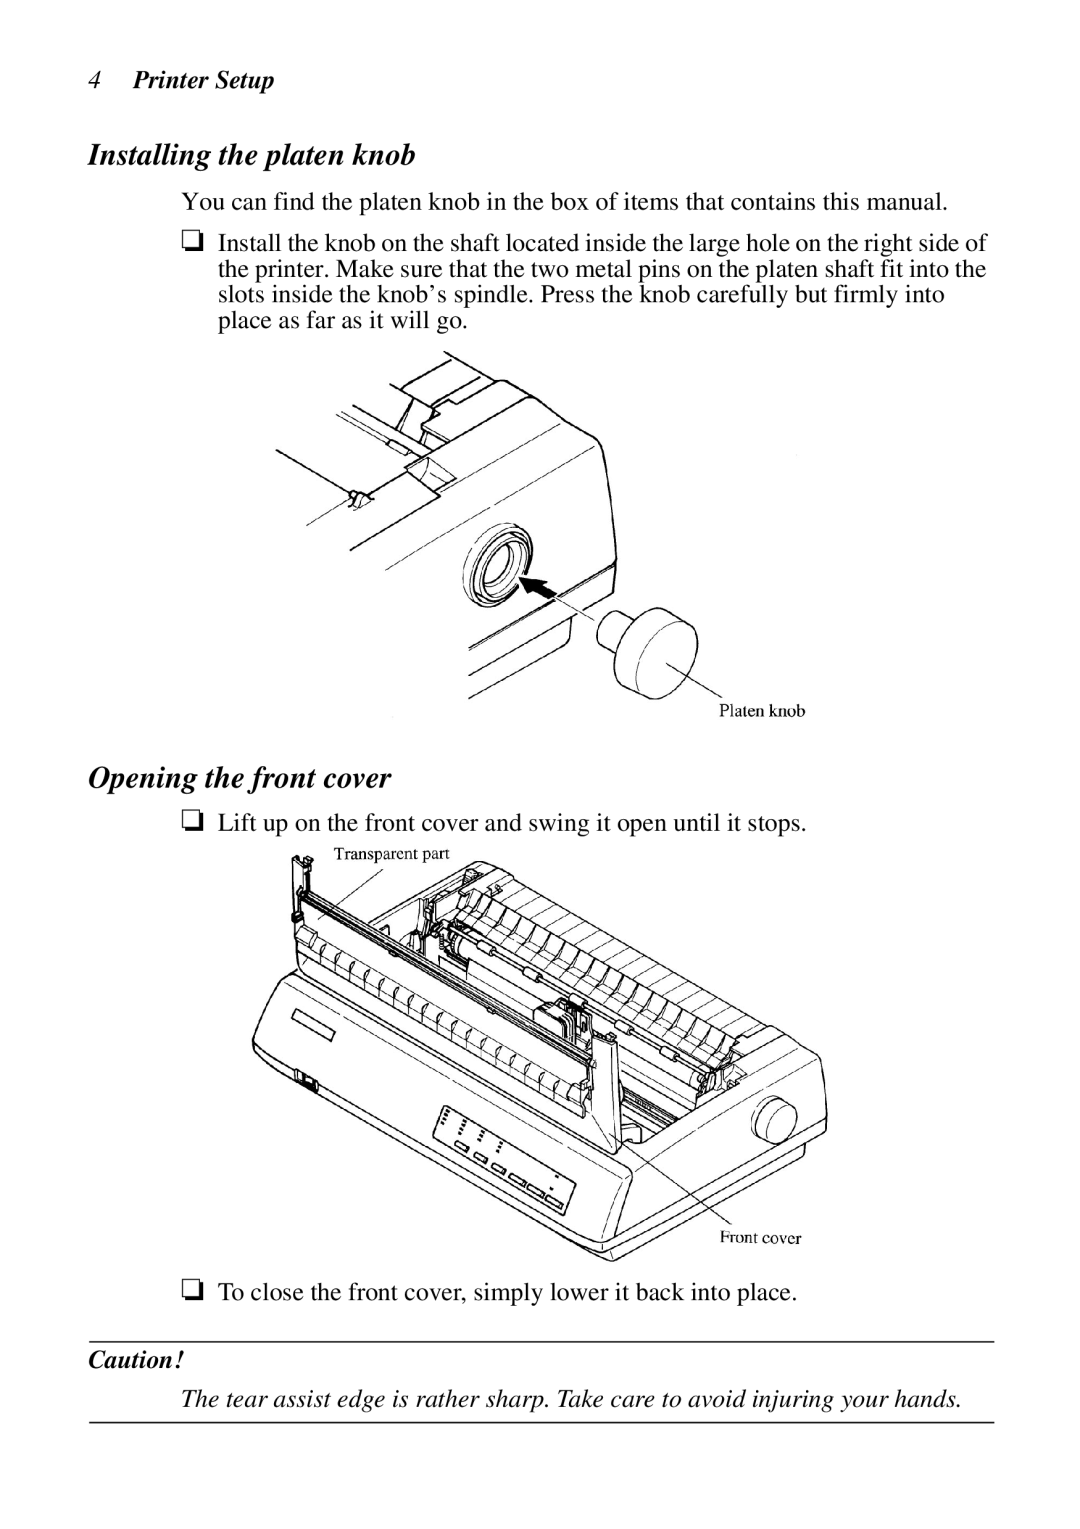 Star Micronics XB24-250 II user manual Installing the platen knob, Opening the front cover, Printer Setup 